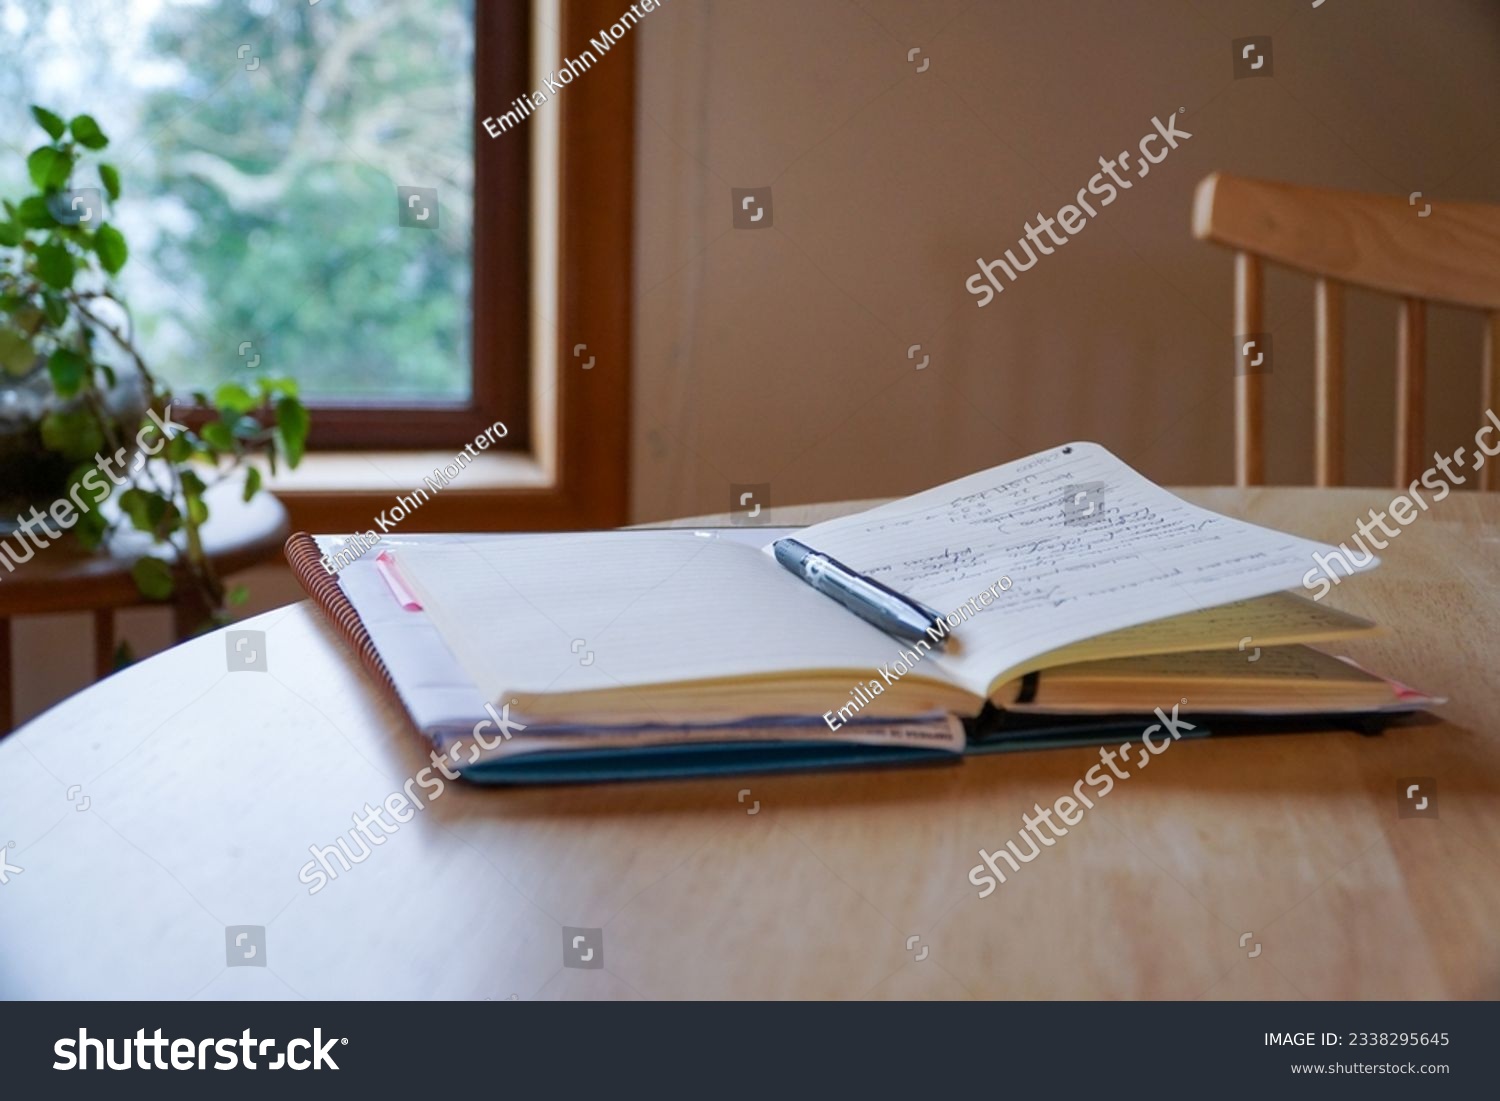 An open notebook with a pencil placed on top, resting on a wooden table inside the house, symbolizing creativity and ideas in a cozy home setting. #2338295645